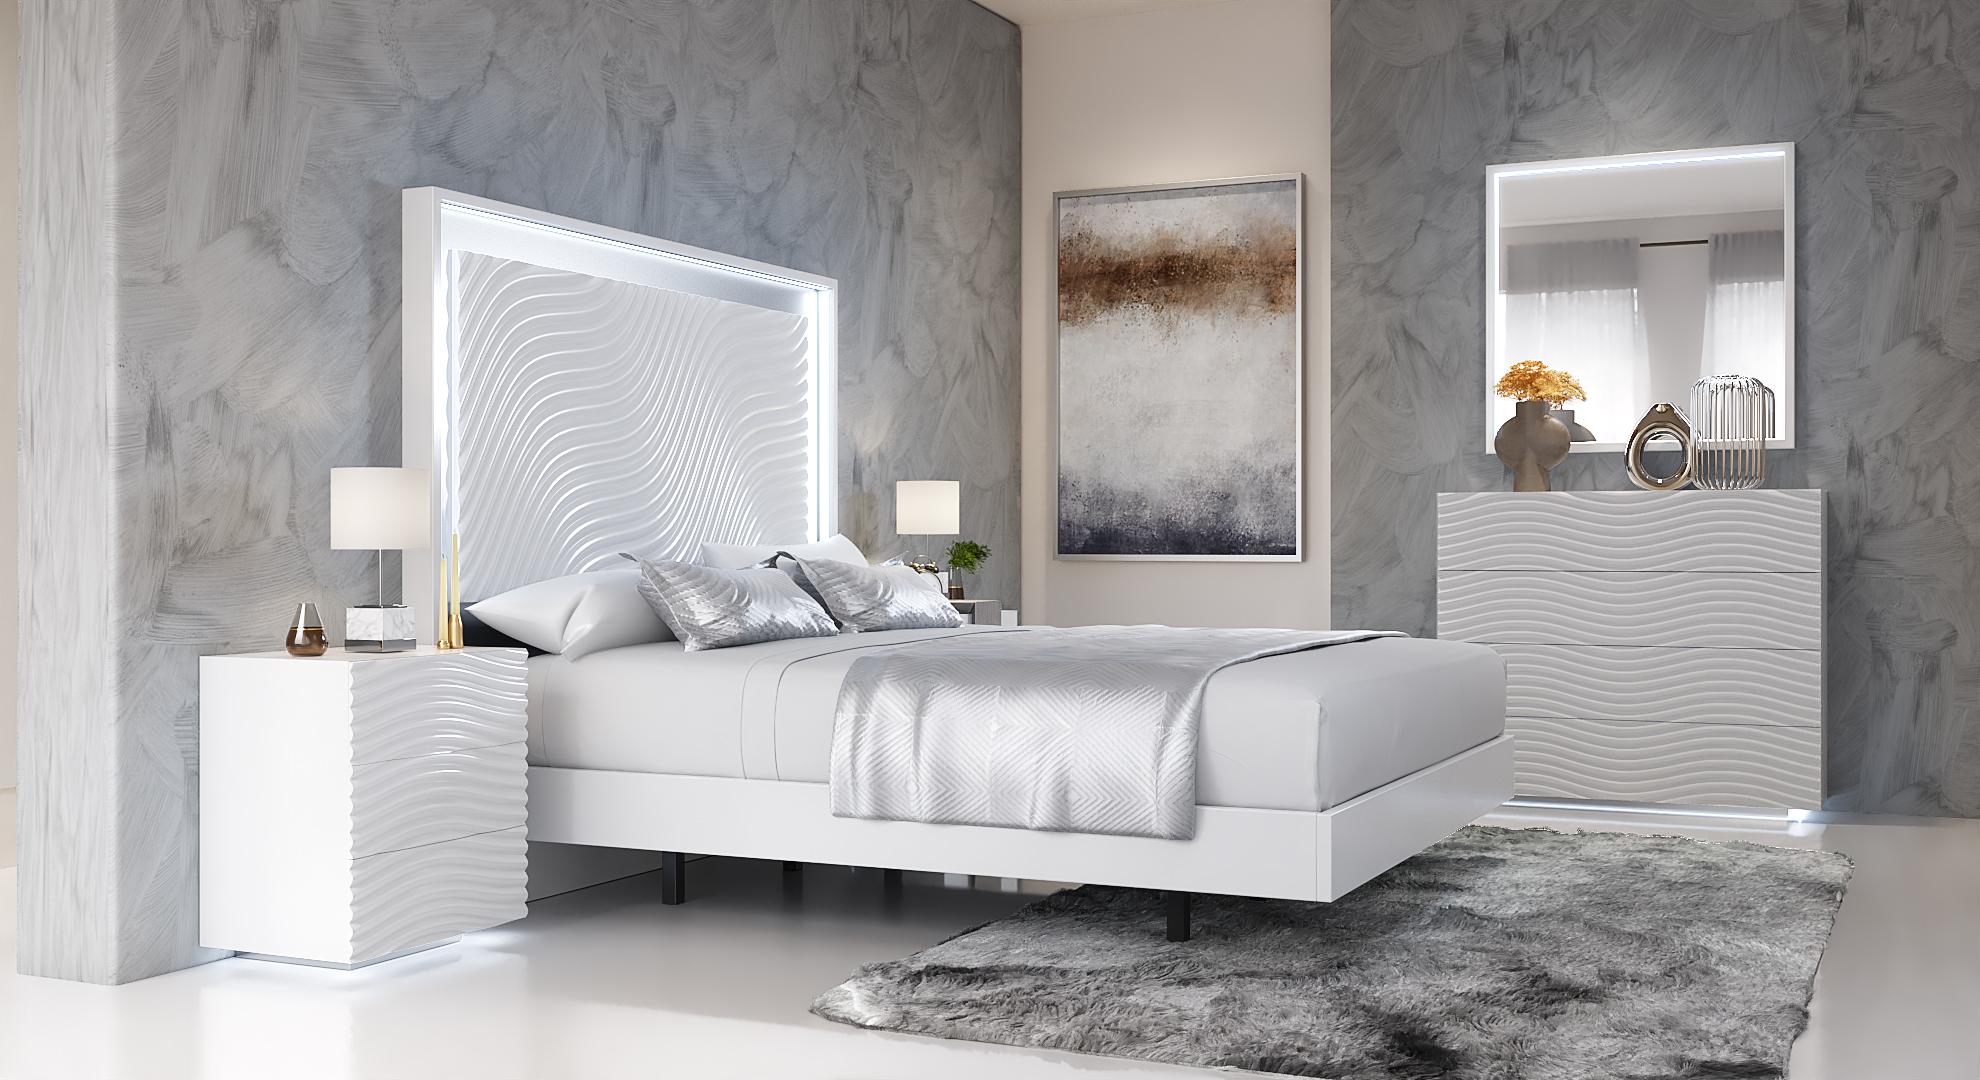 

    
Glam Shiny White King Bedroom Set 6 WAVE ESF Contemporary Modern MADE IN SPAIN
